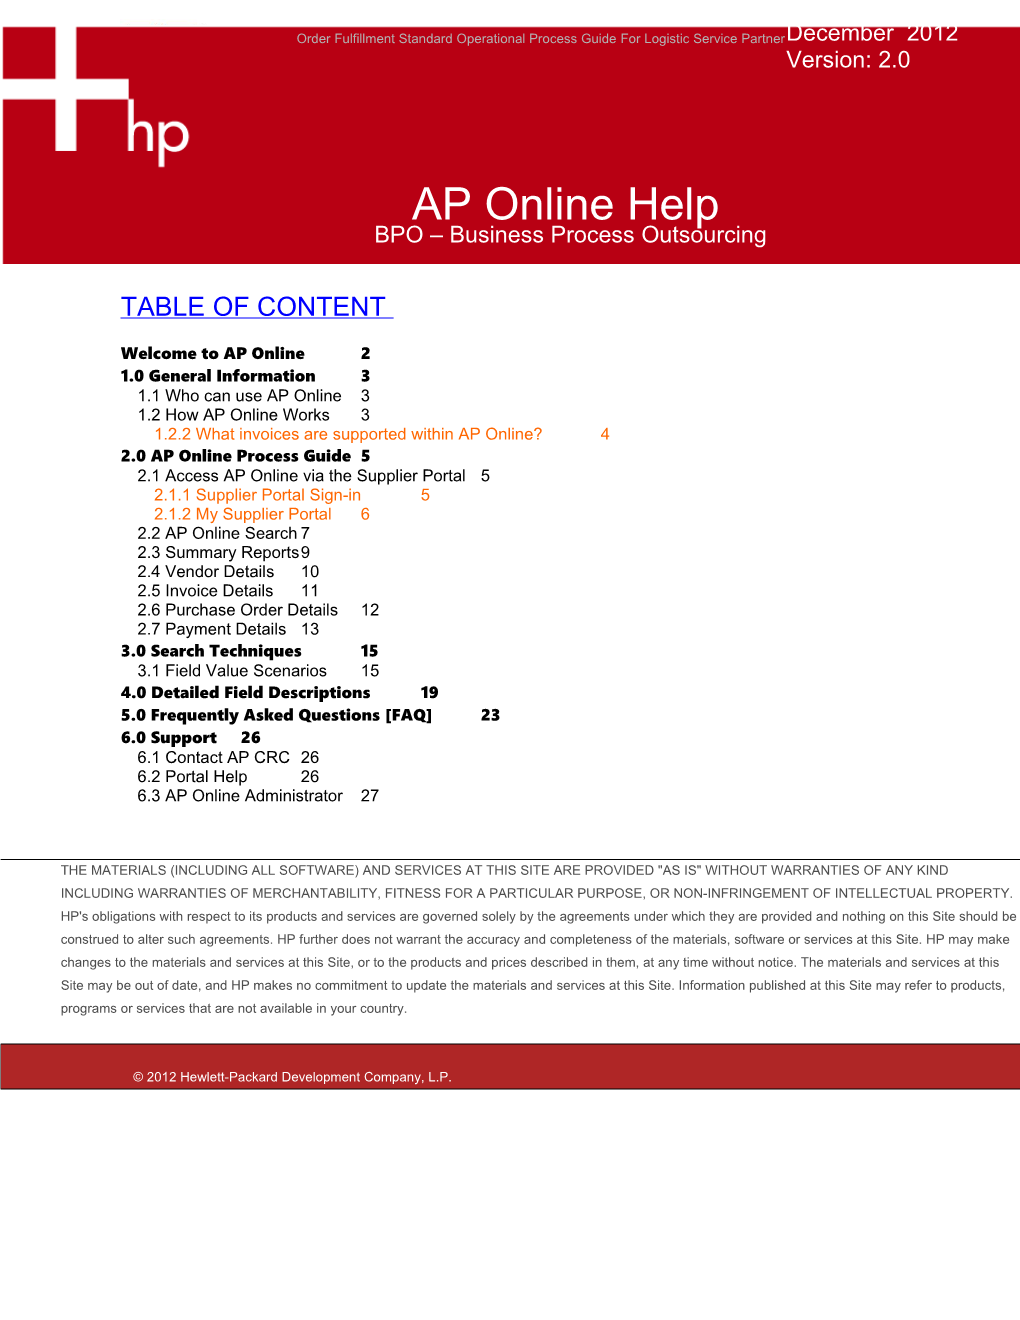 Welcome to AP Online